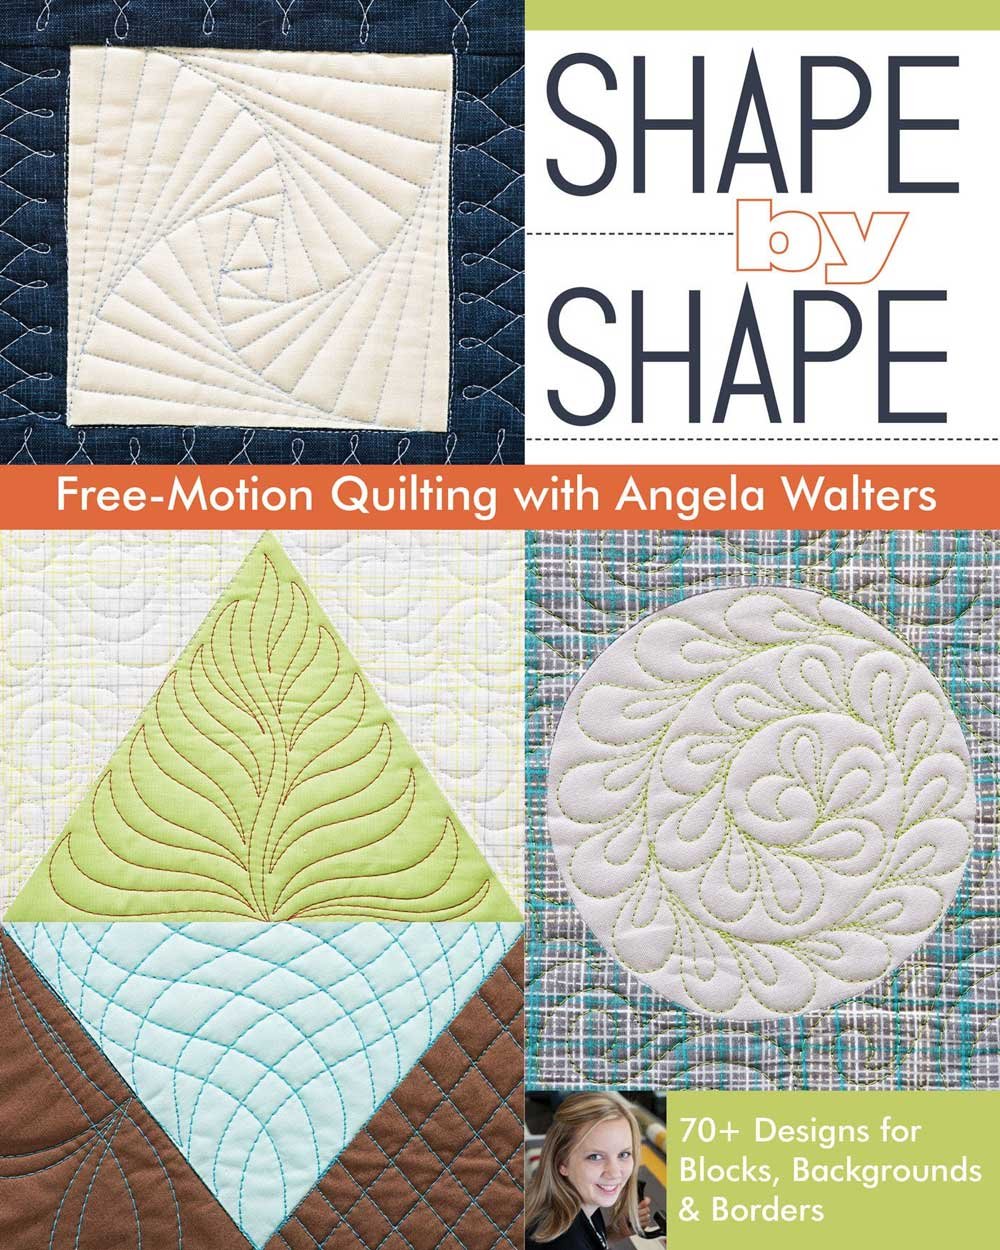 With 70 free-motion quilting designs, this is the go-to resource for any quilting project.